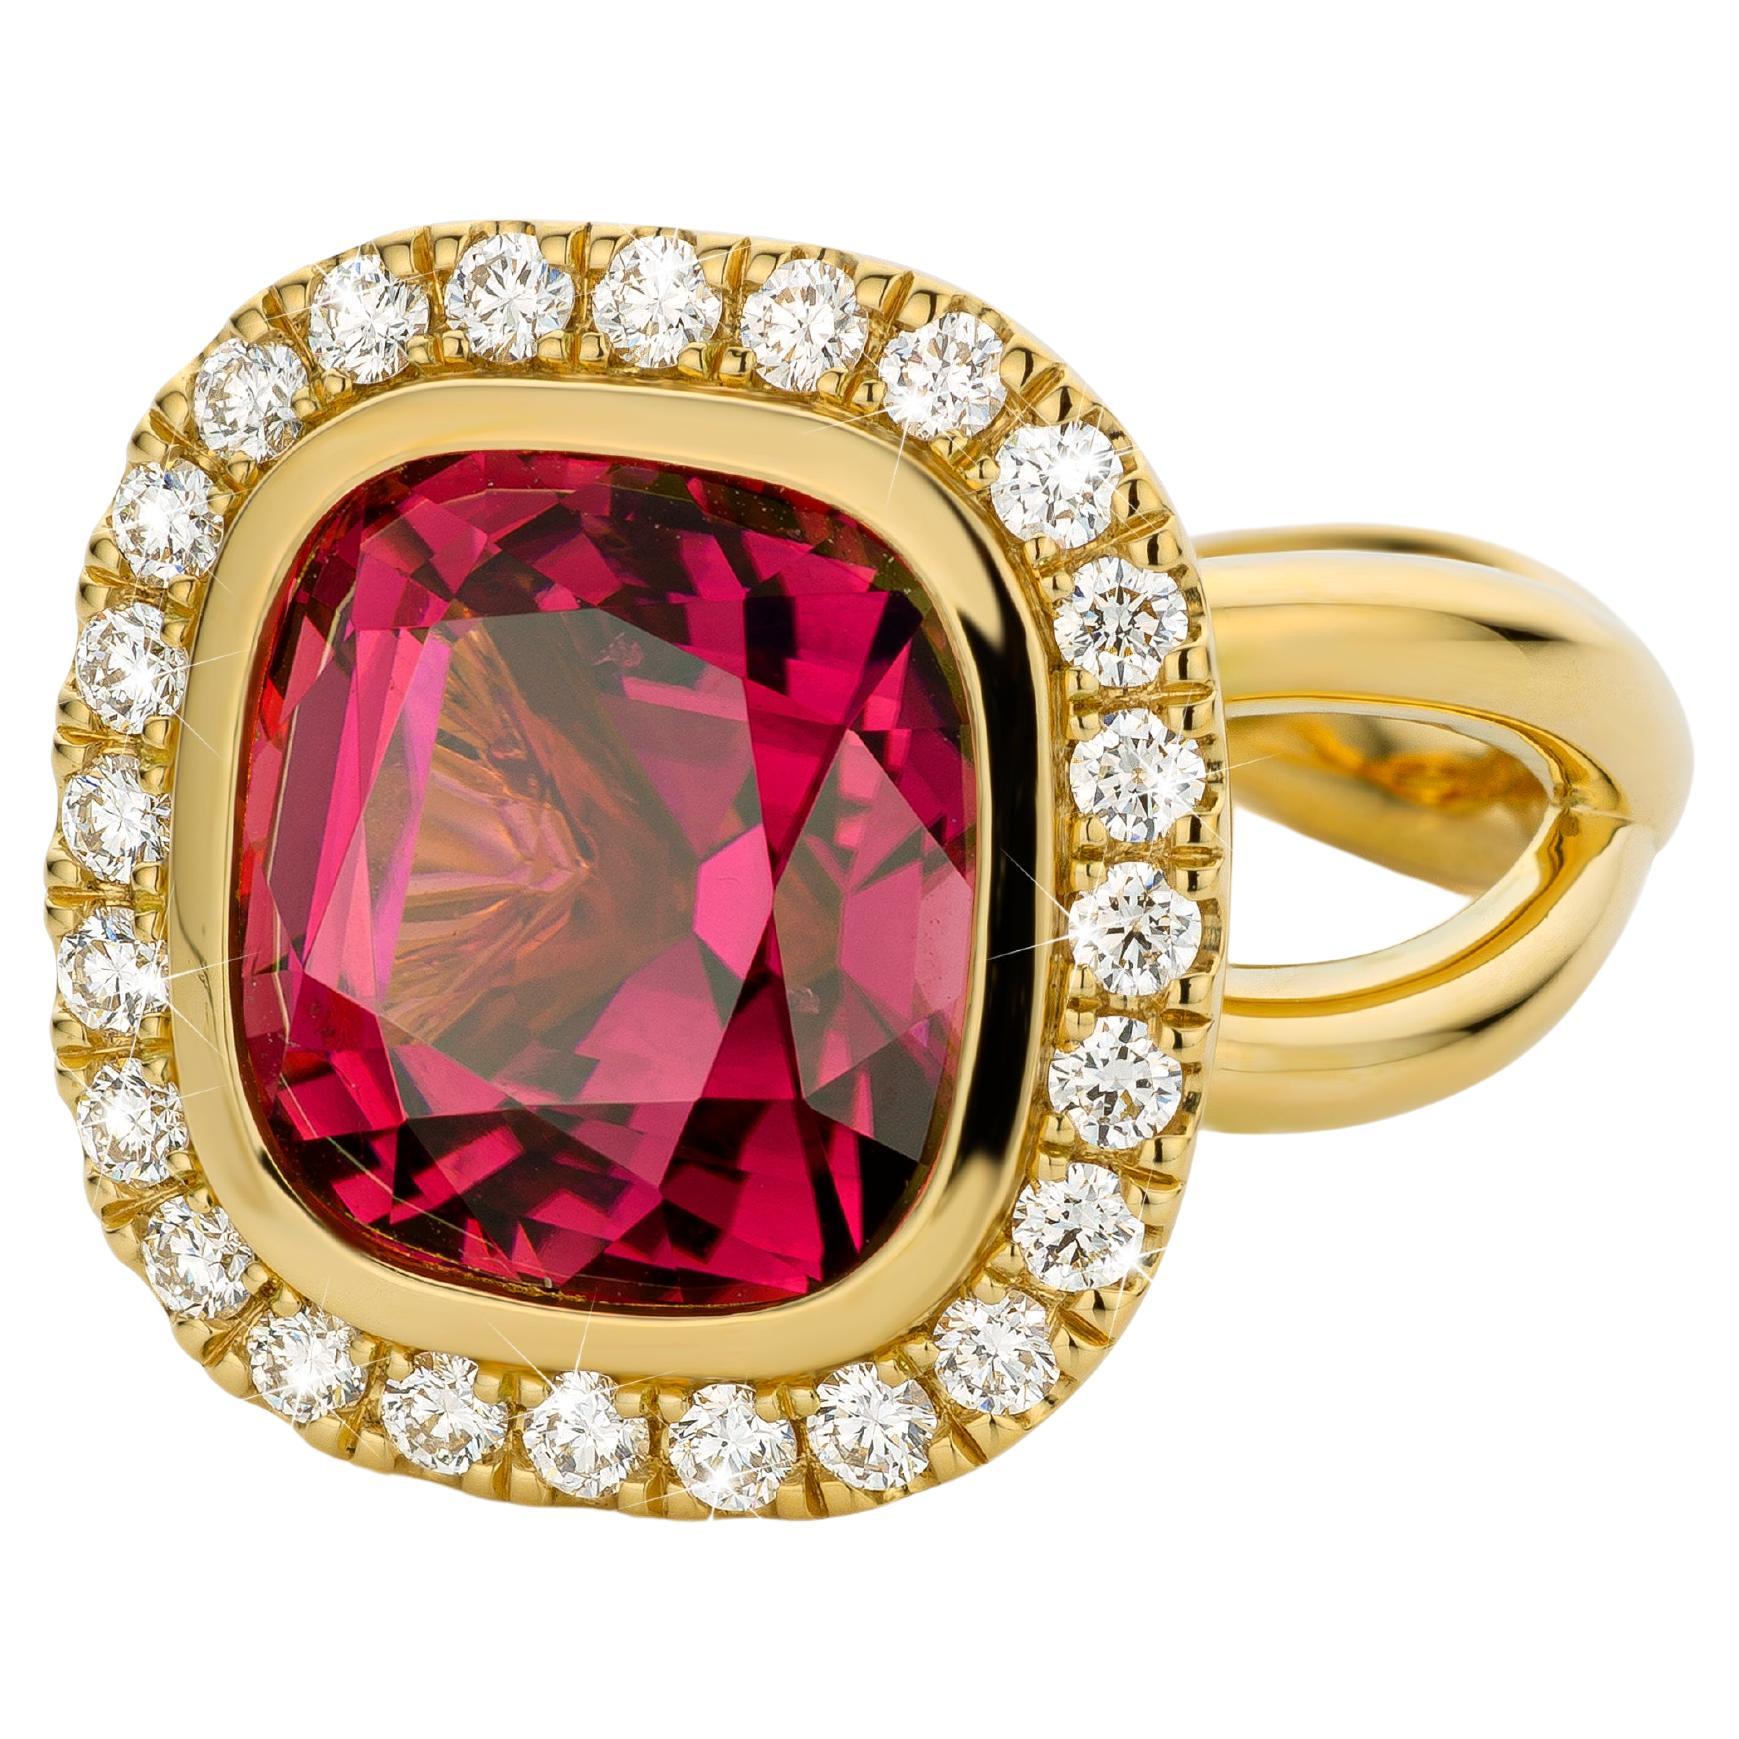 Cober “Playful Pink” with a deep pink Tourmaline and 24 Diamonds YellowGold Ring